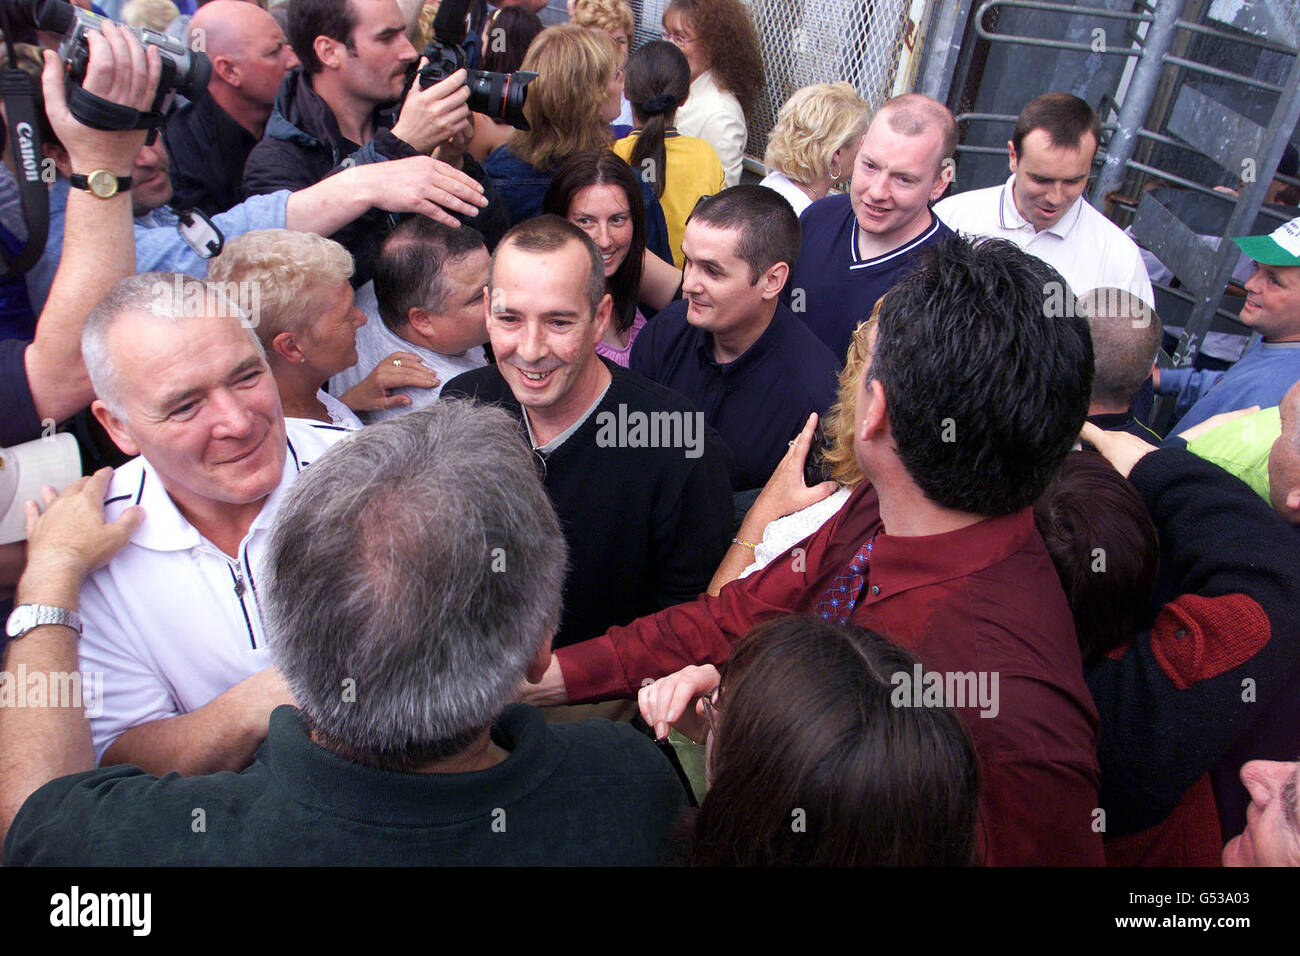 IRA Prisoners emerge through the prison turnstile, greeted by friends and family at the Maze, near Lisburn, county Antrim, as the final wave of terrorist prisoners early release from Northern Ireland's jails began. Just 15 inmates will remain inside the Maze. Stock Photo